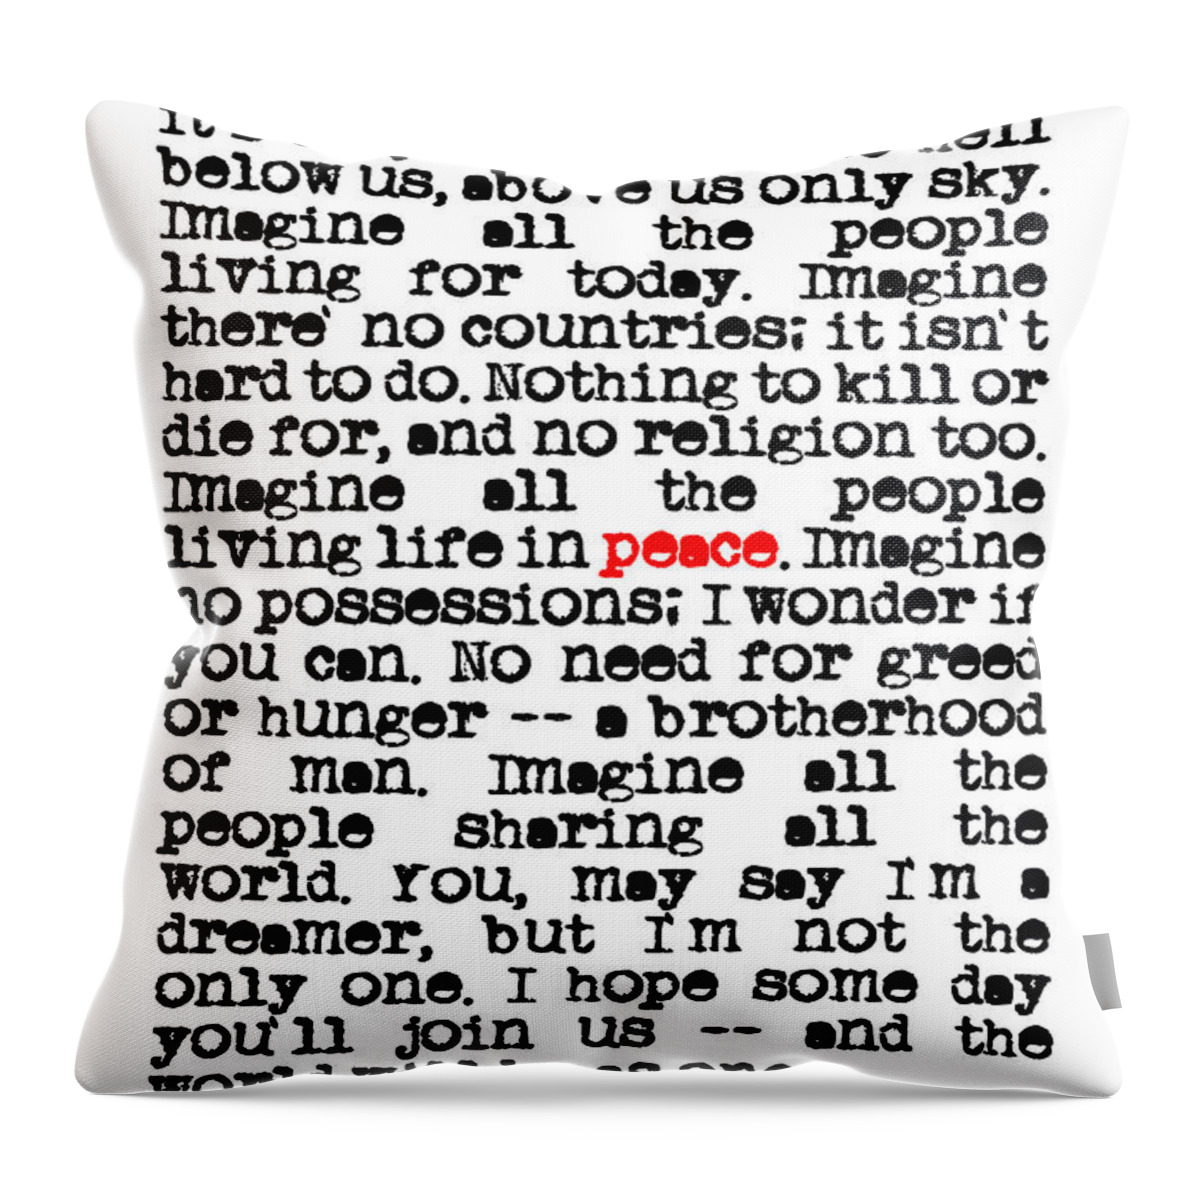 Imagine Throw Pillow featuring the painting Imagine - John Lennon by Nik Helbig